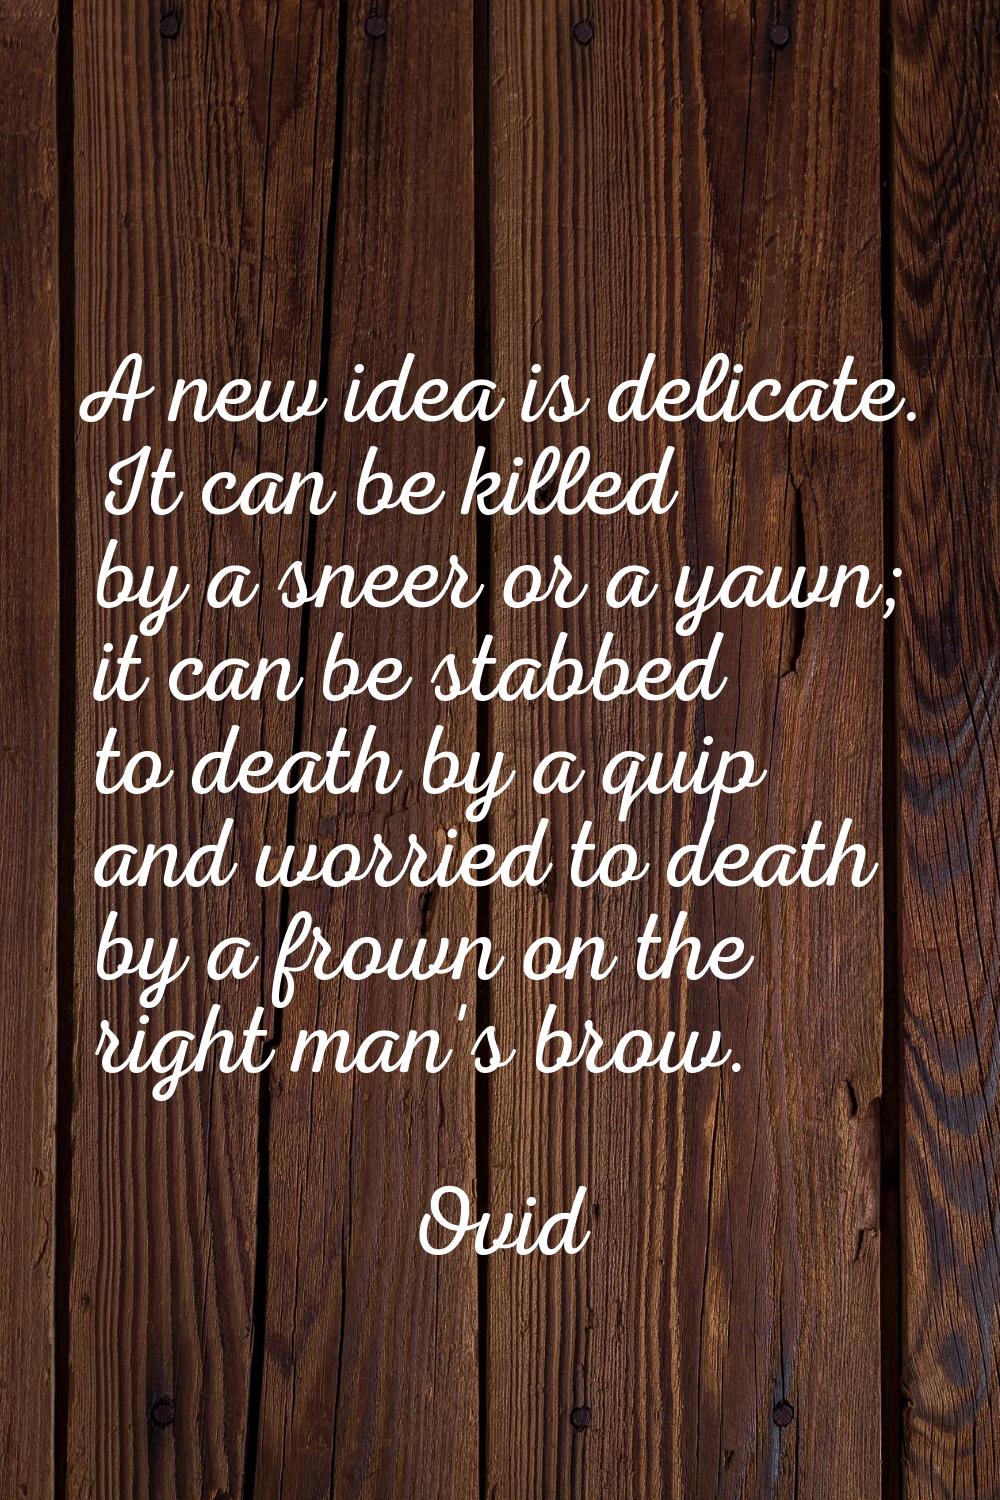 A new idea is delicate. It can be killed by a sneer or a yawn; it can be stabbed to death by a quip